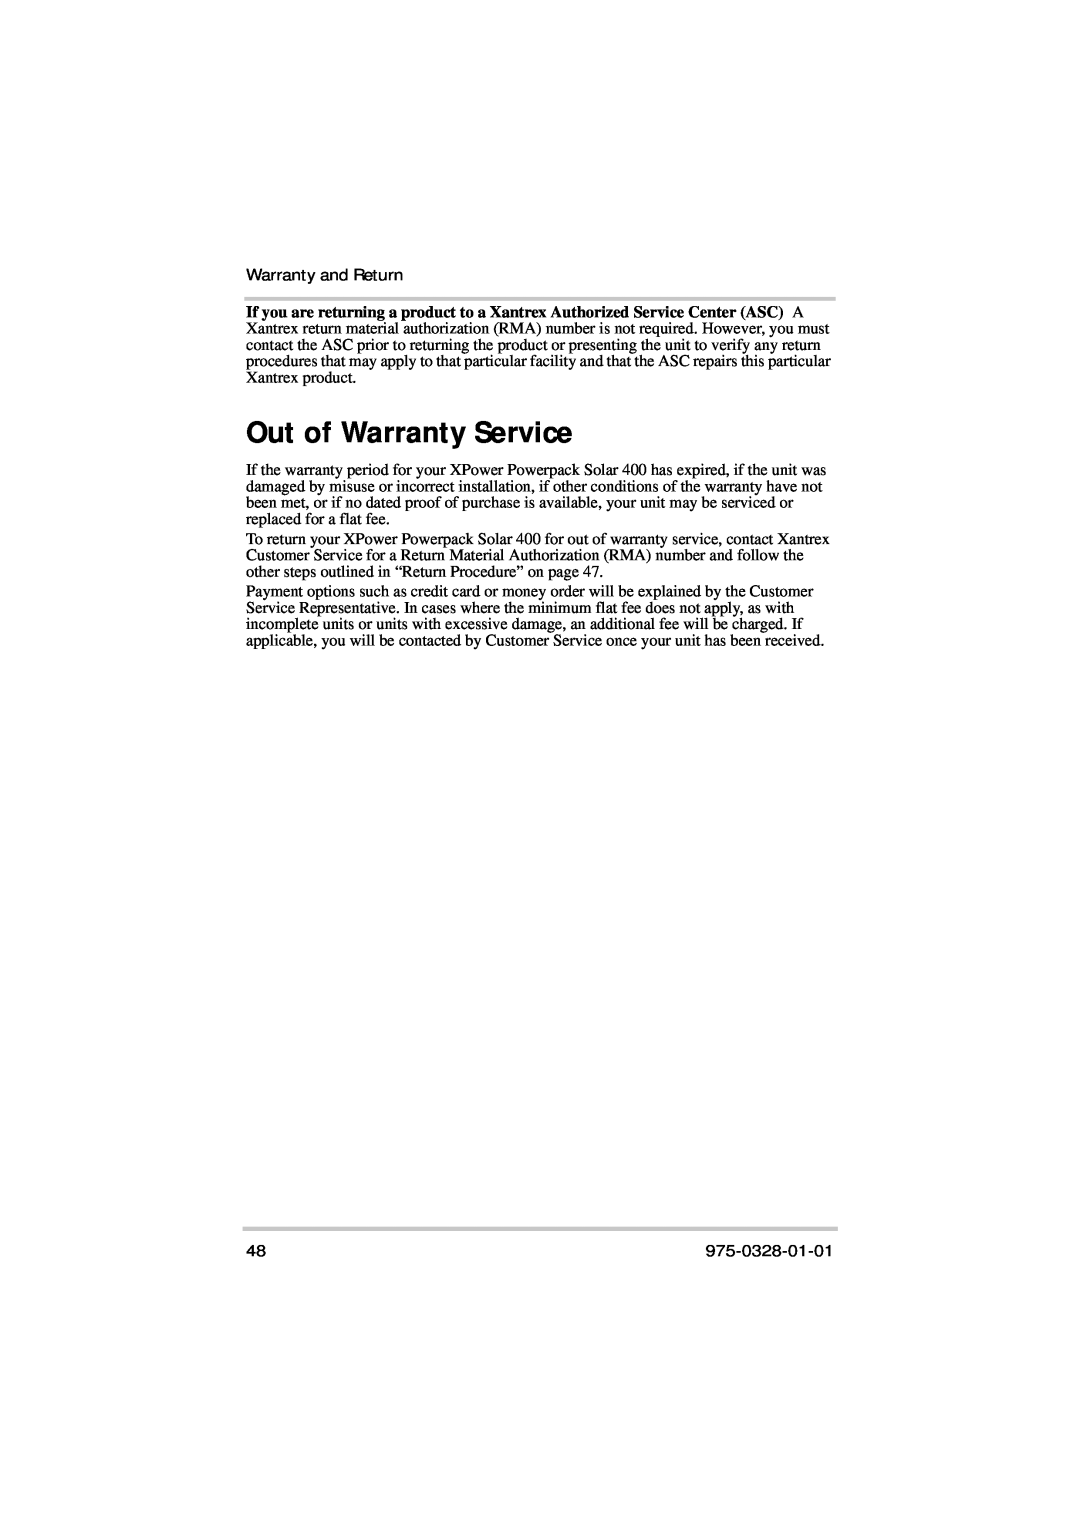 Xantrex Technology Solar 400 manual Out of Warranty Service, Warranty and Return, 975-0328-01-01 